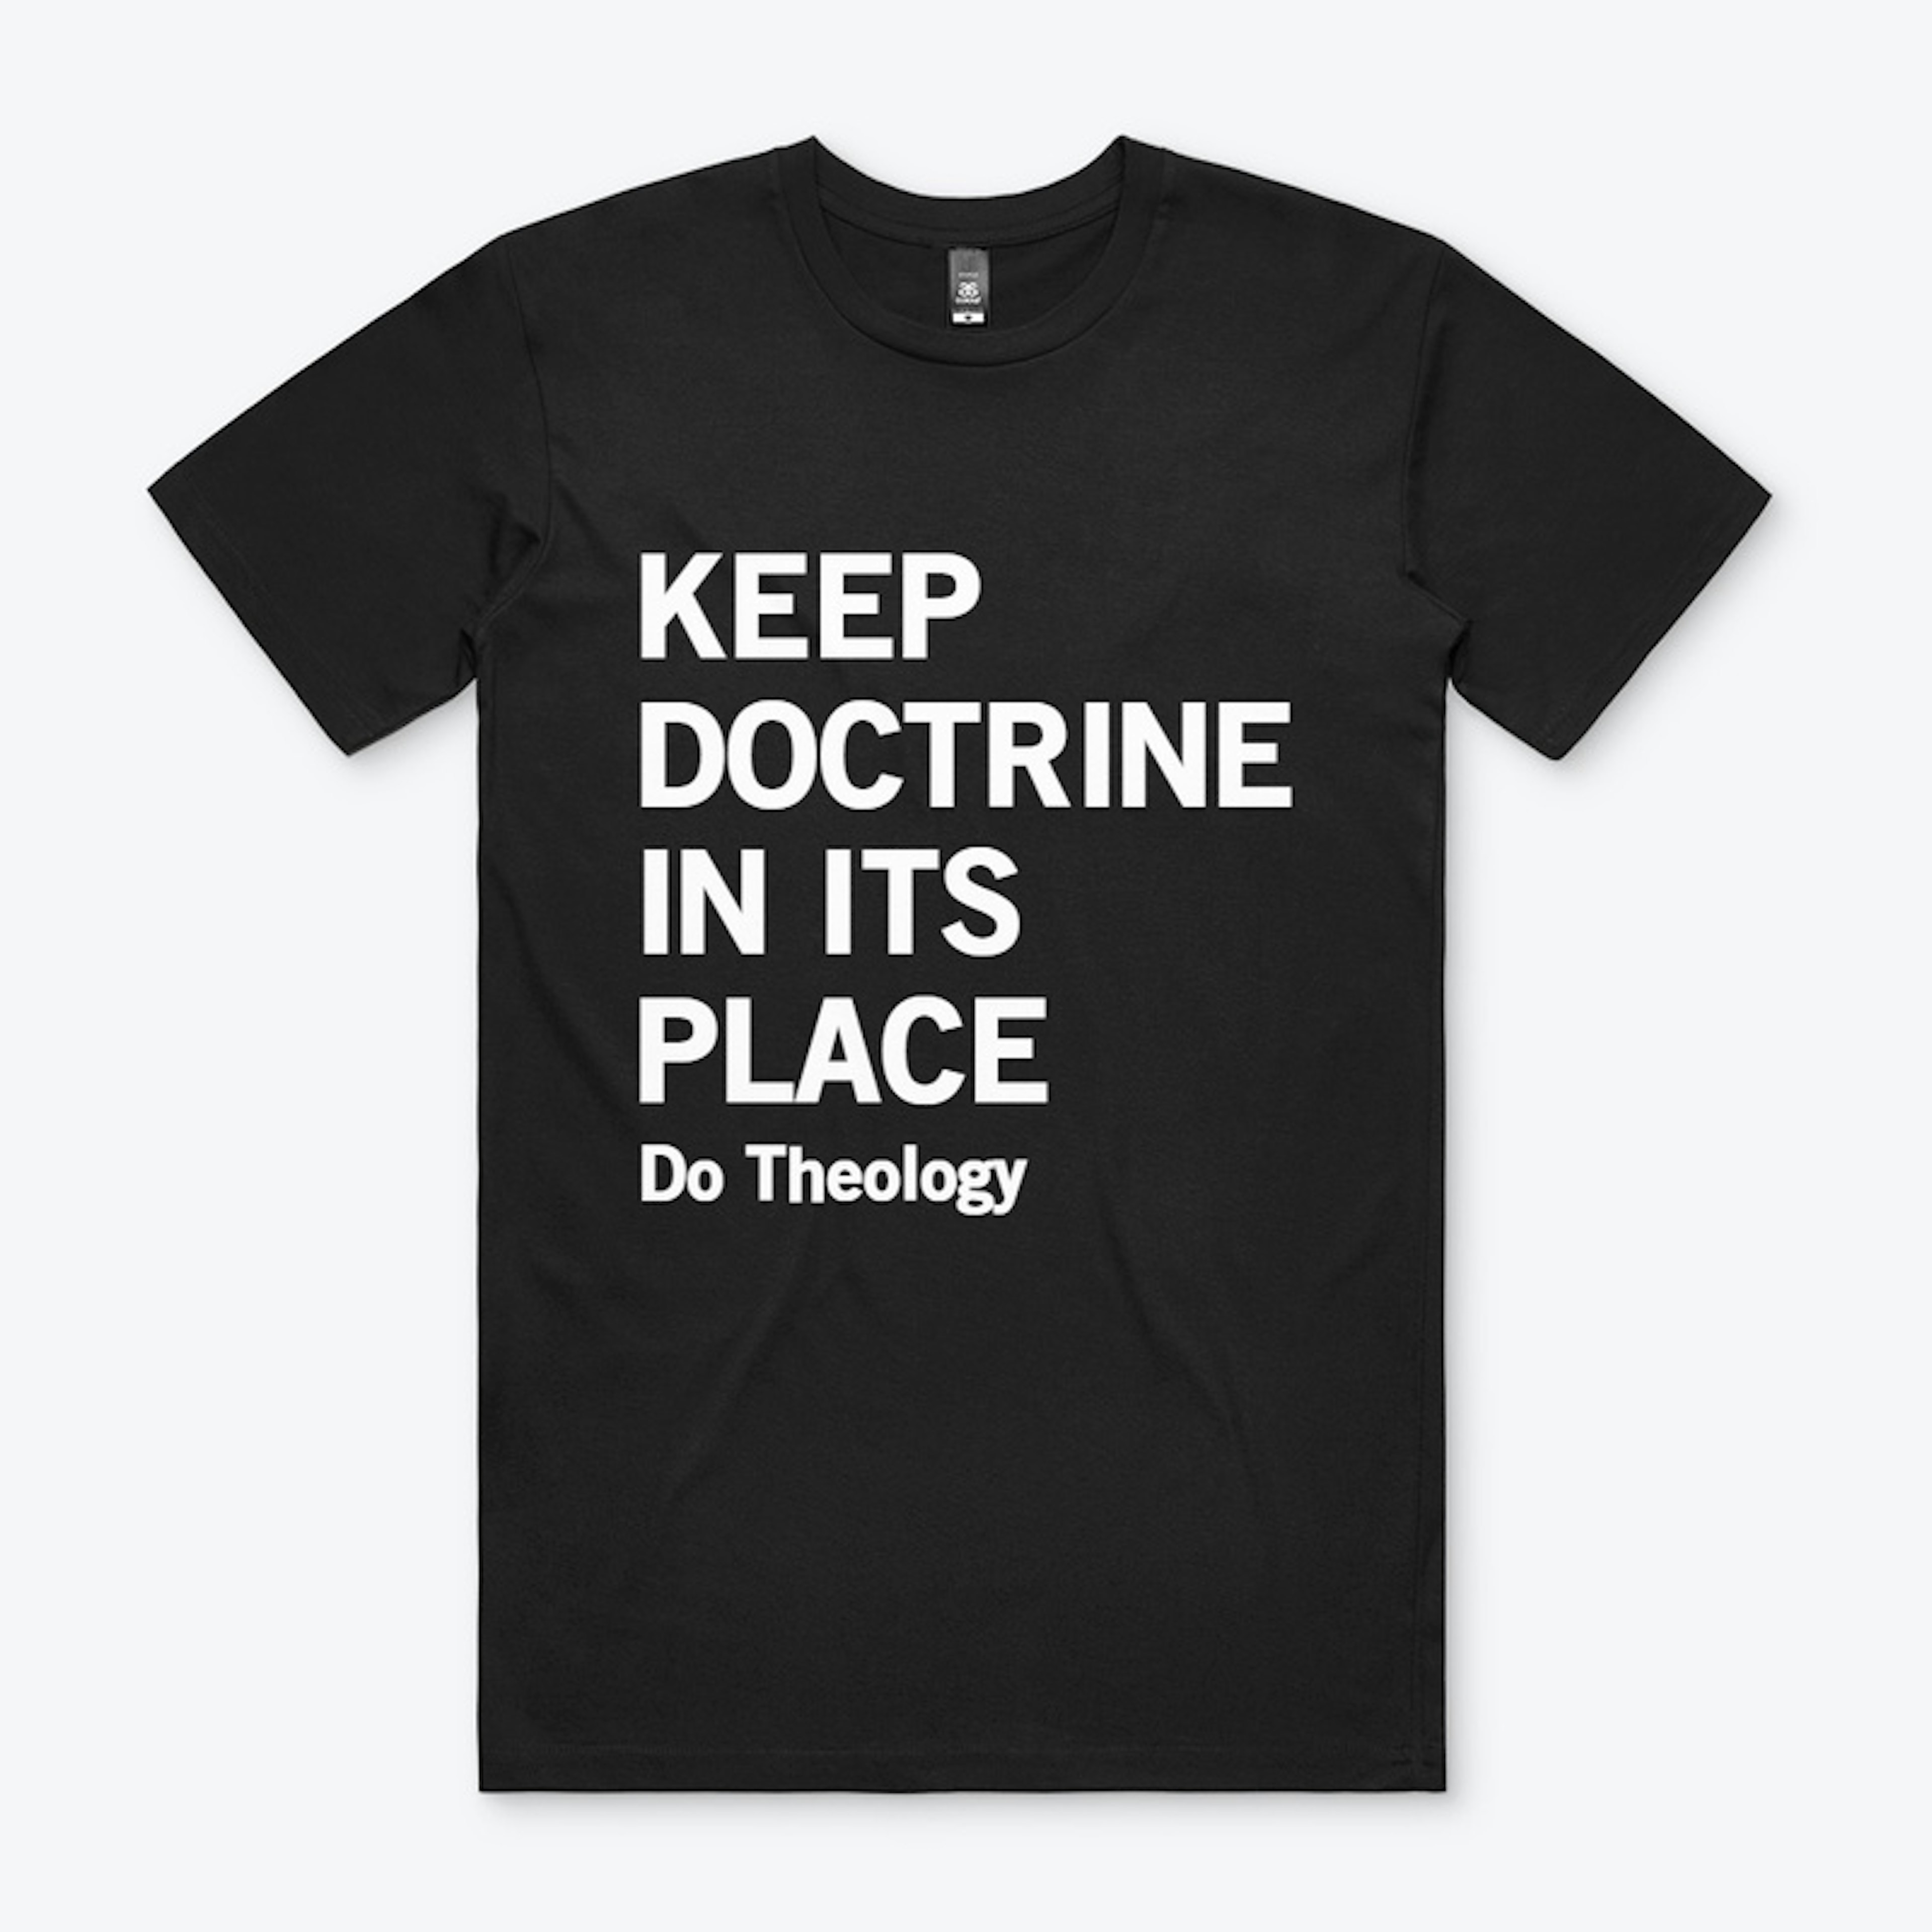 Keep Doctrine In Its Place tee